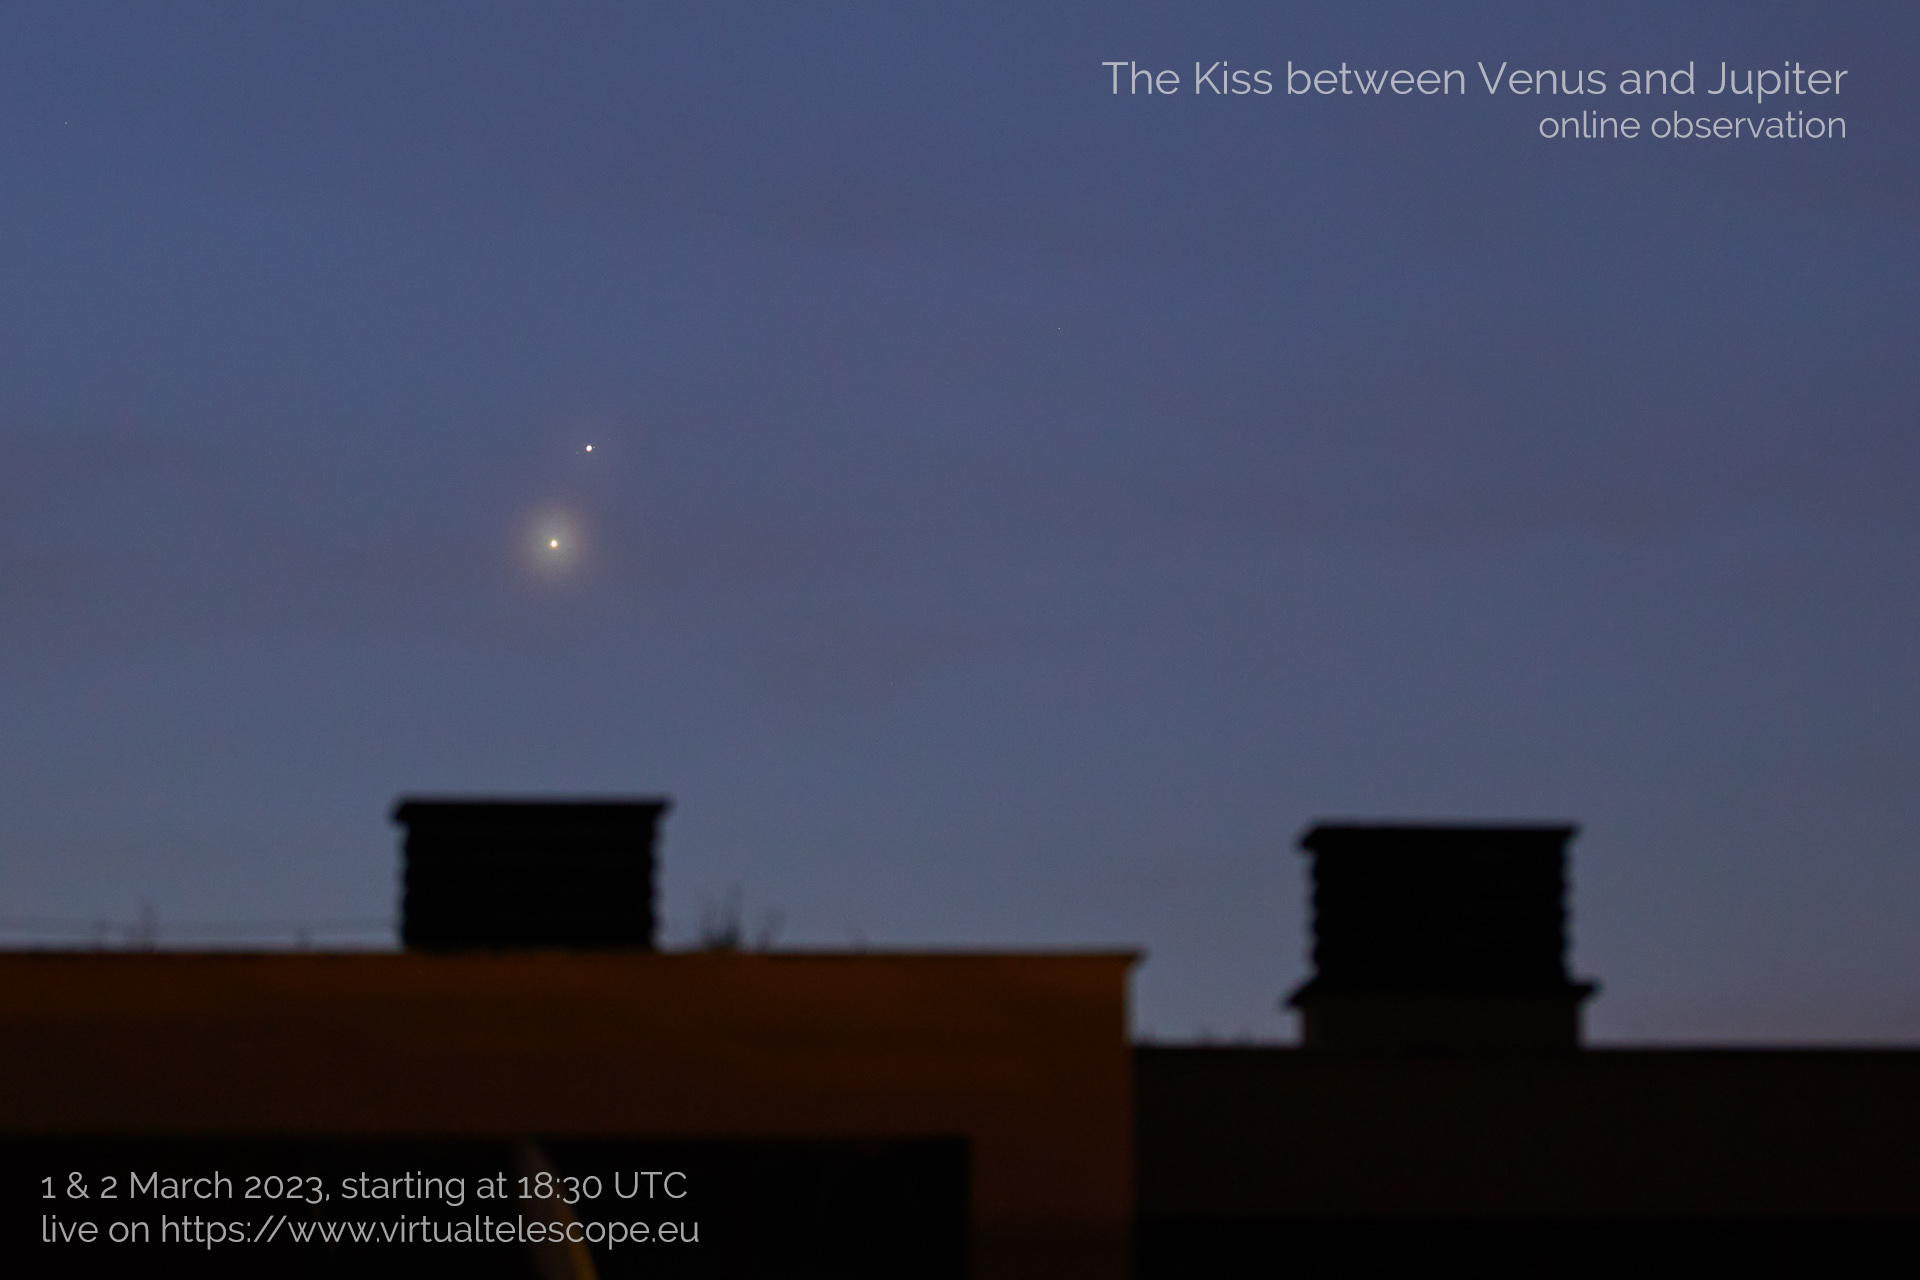 The Kiss between Venus and Jupiter 2023: poster of the event.